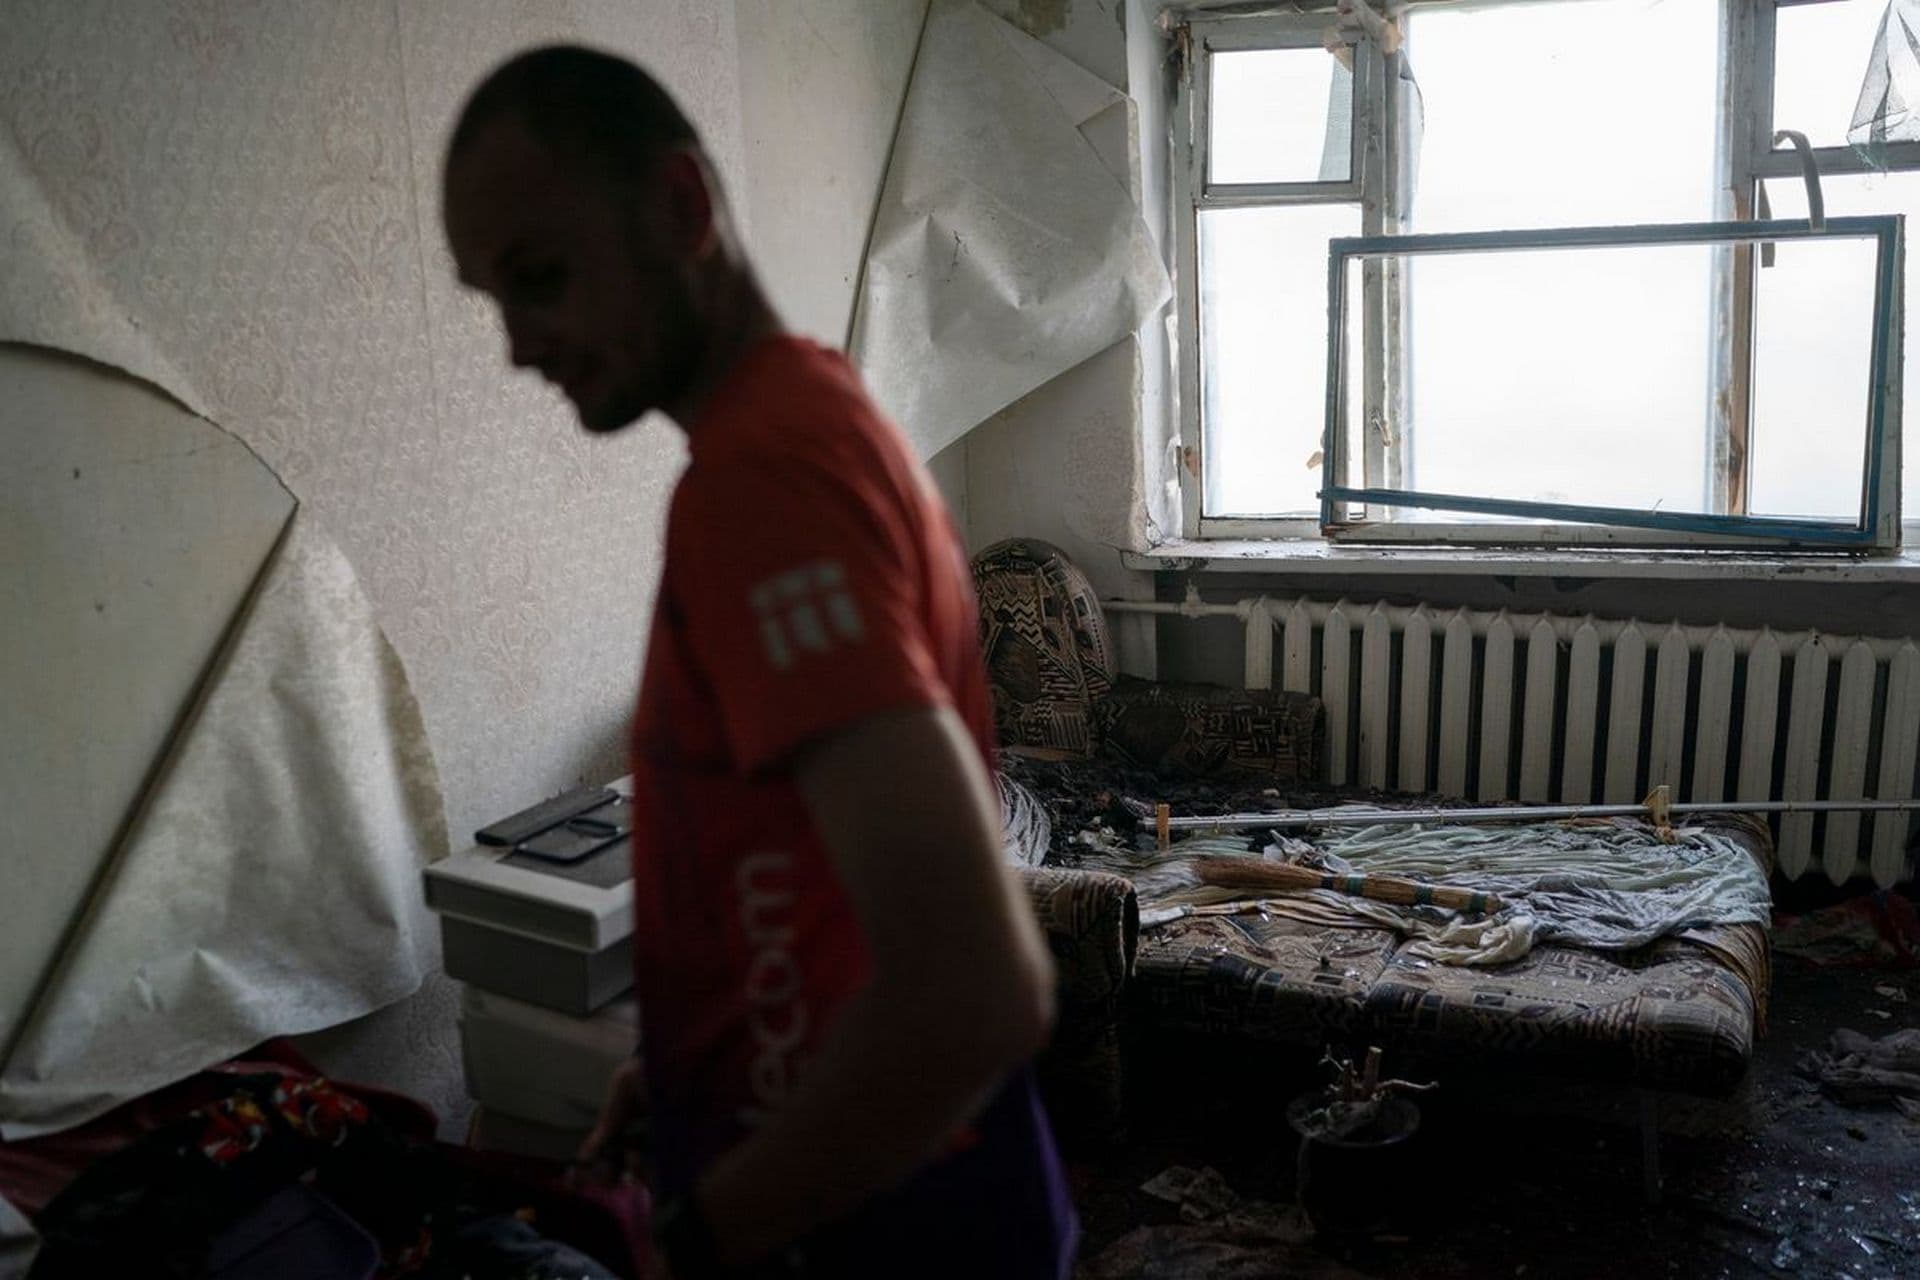 Kostiantyn Daineko, stands in his mother's apartment that was damaged after a Russian attack in Slovyansk